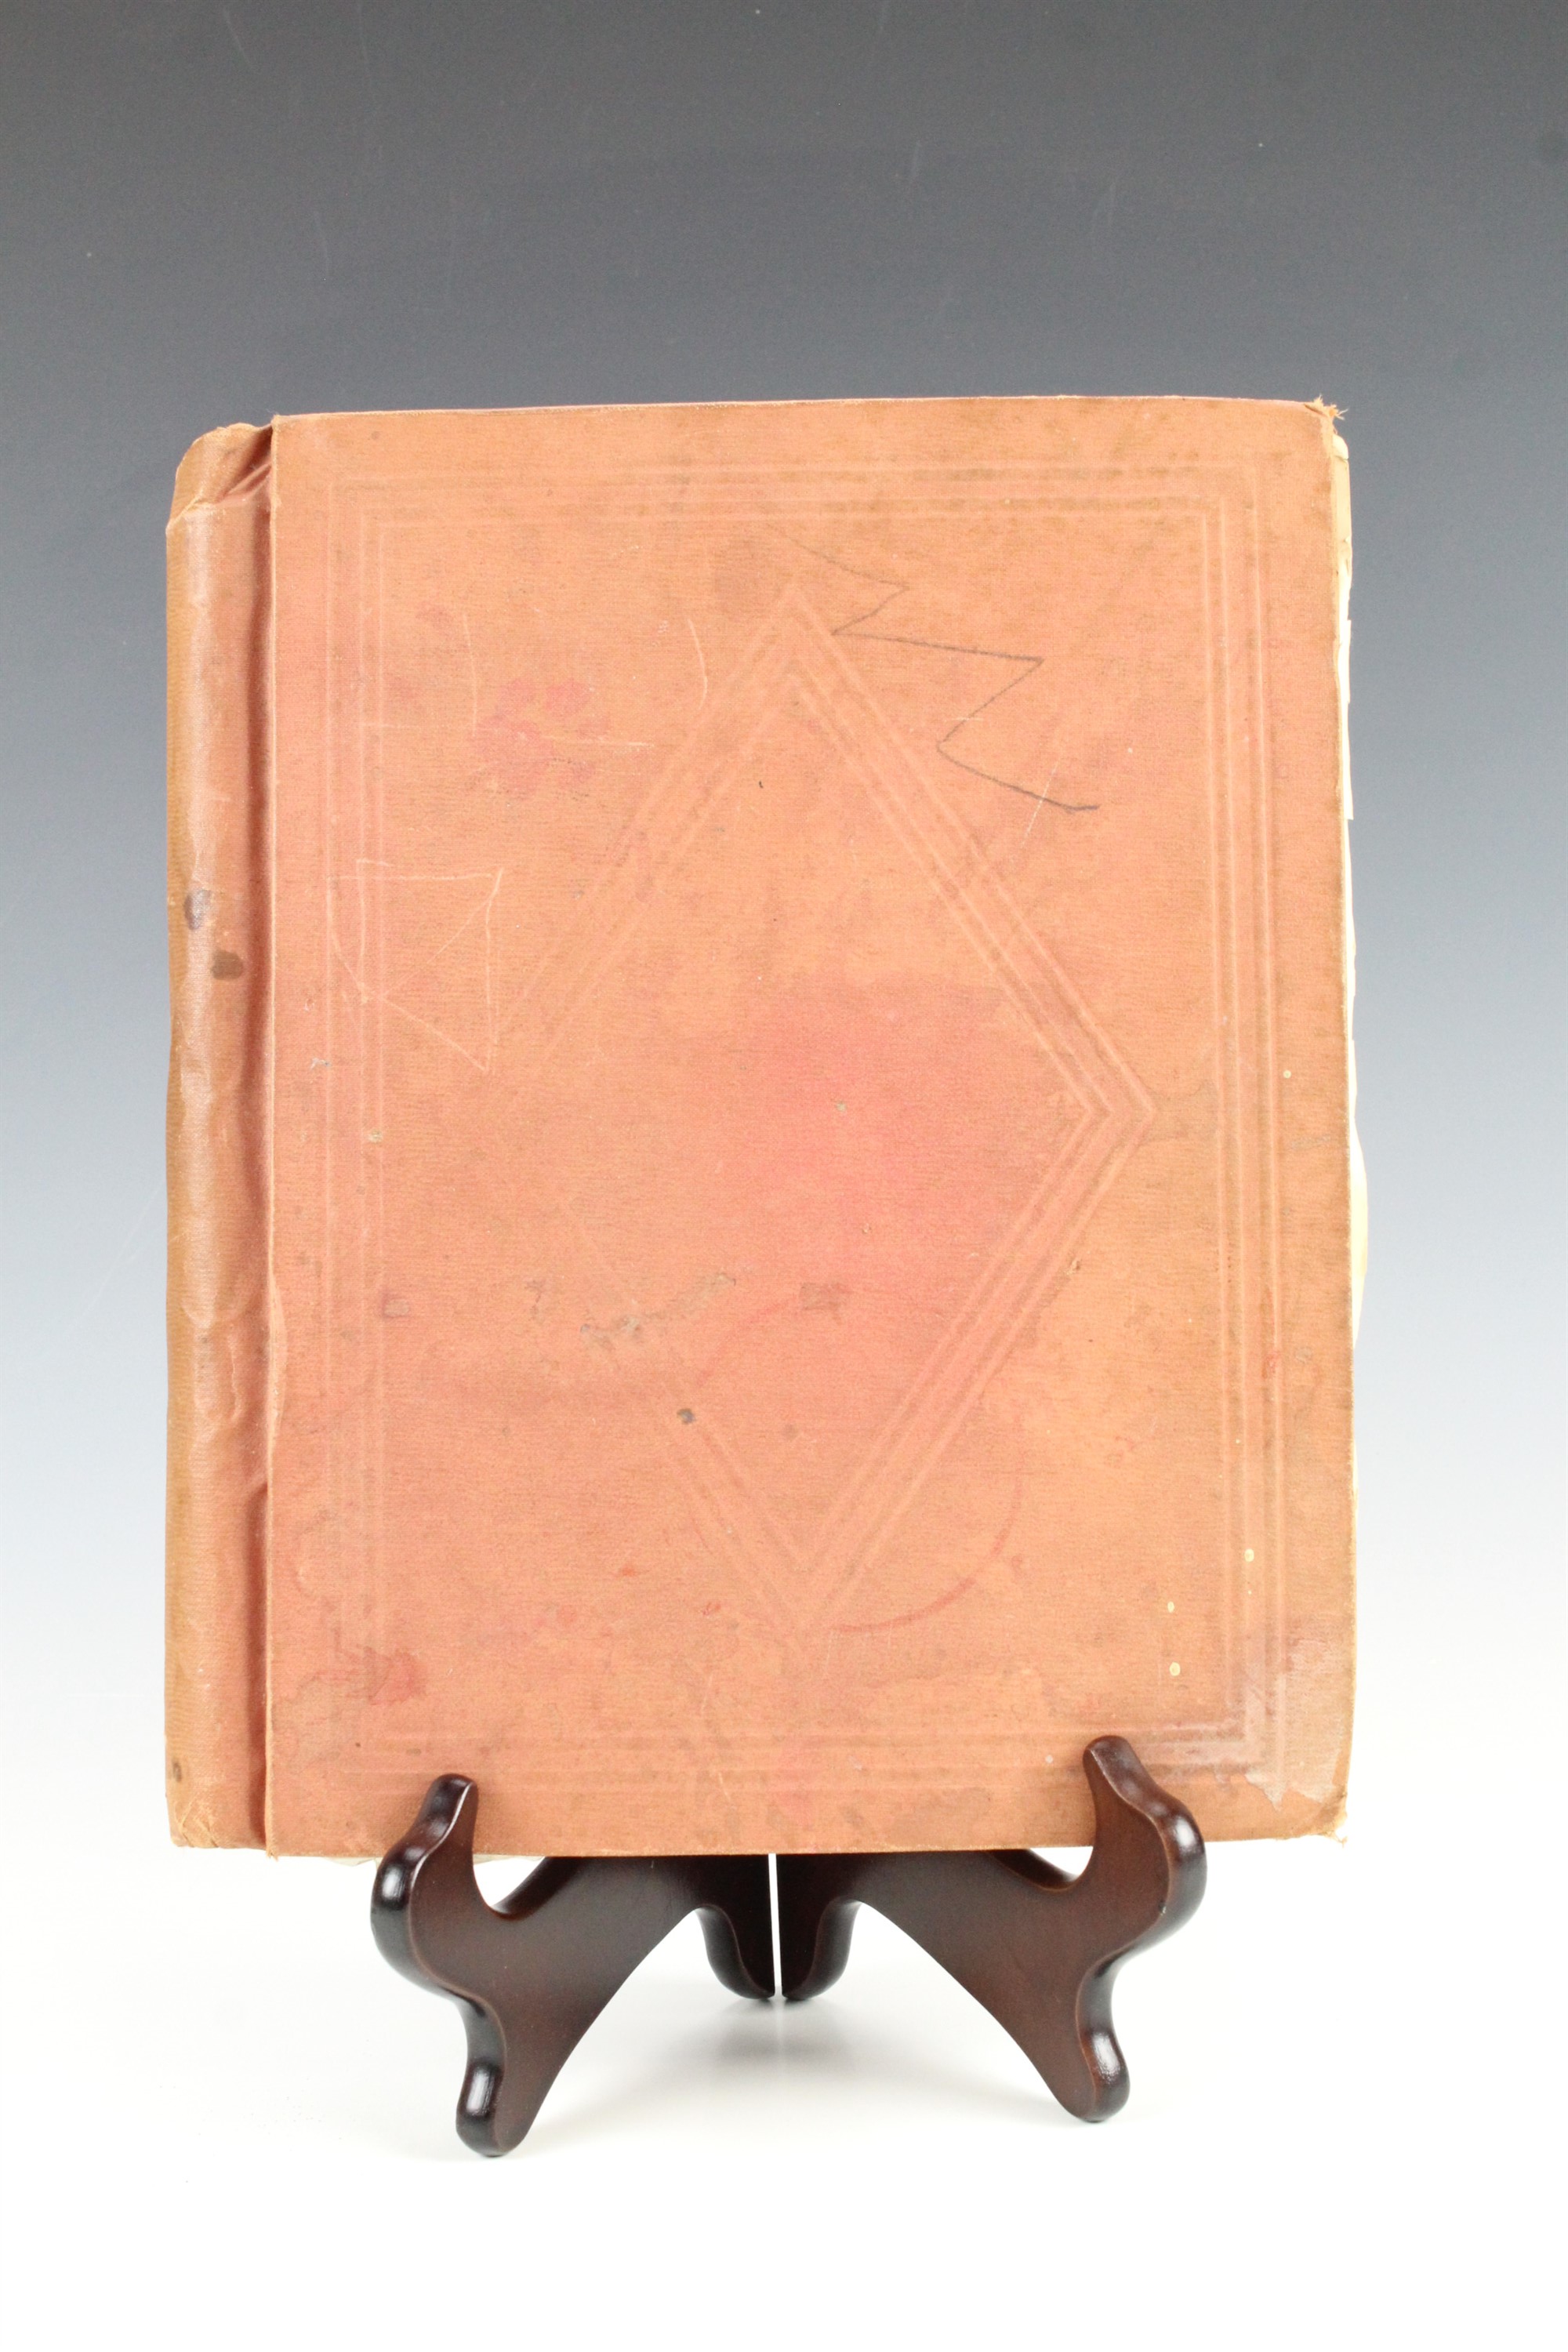 A Barrington Loose Leaf Stamp Album, containing a naive collection of GB and world stamps, circa